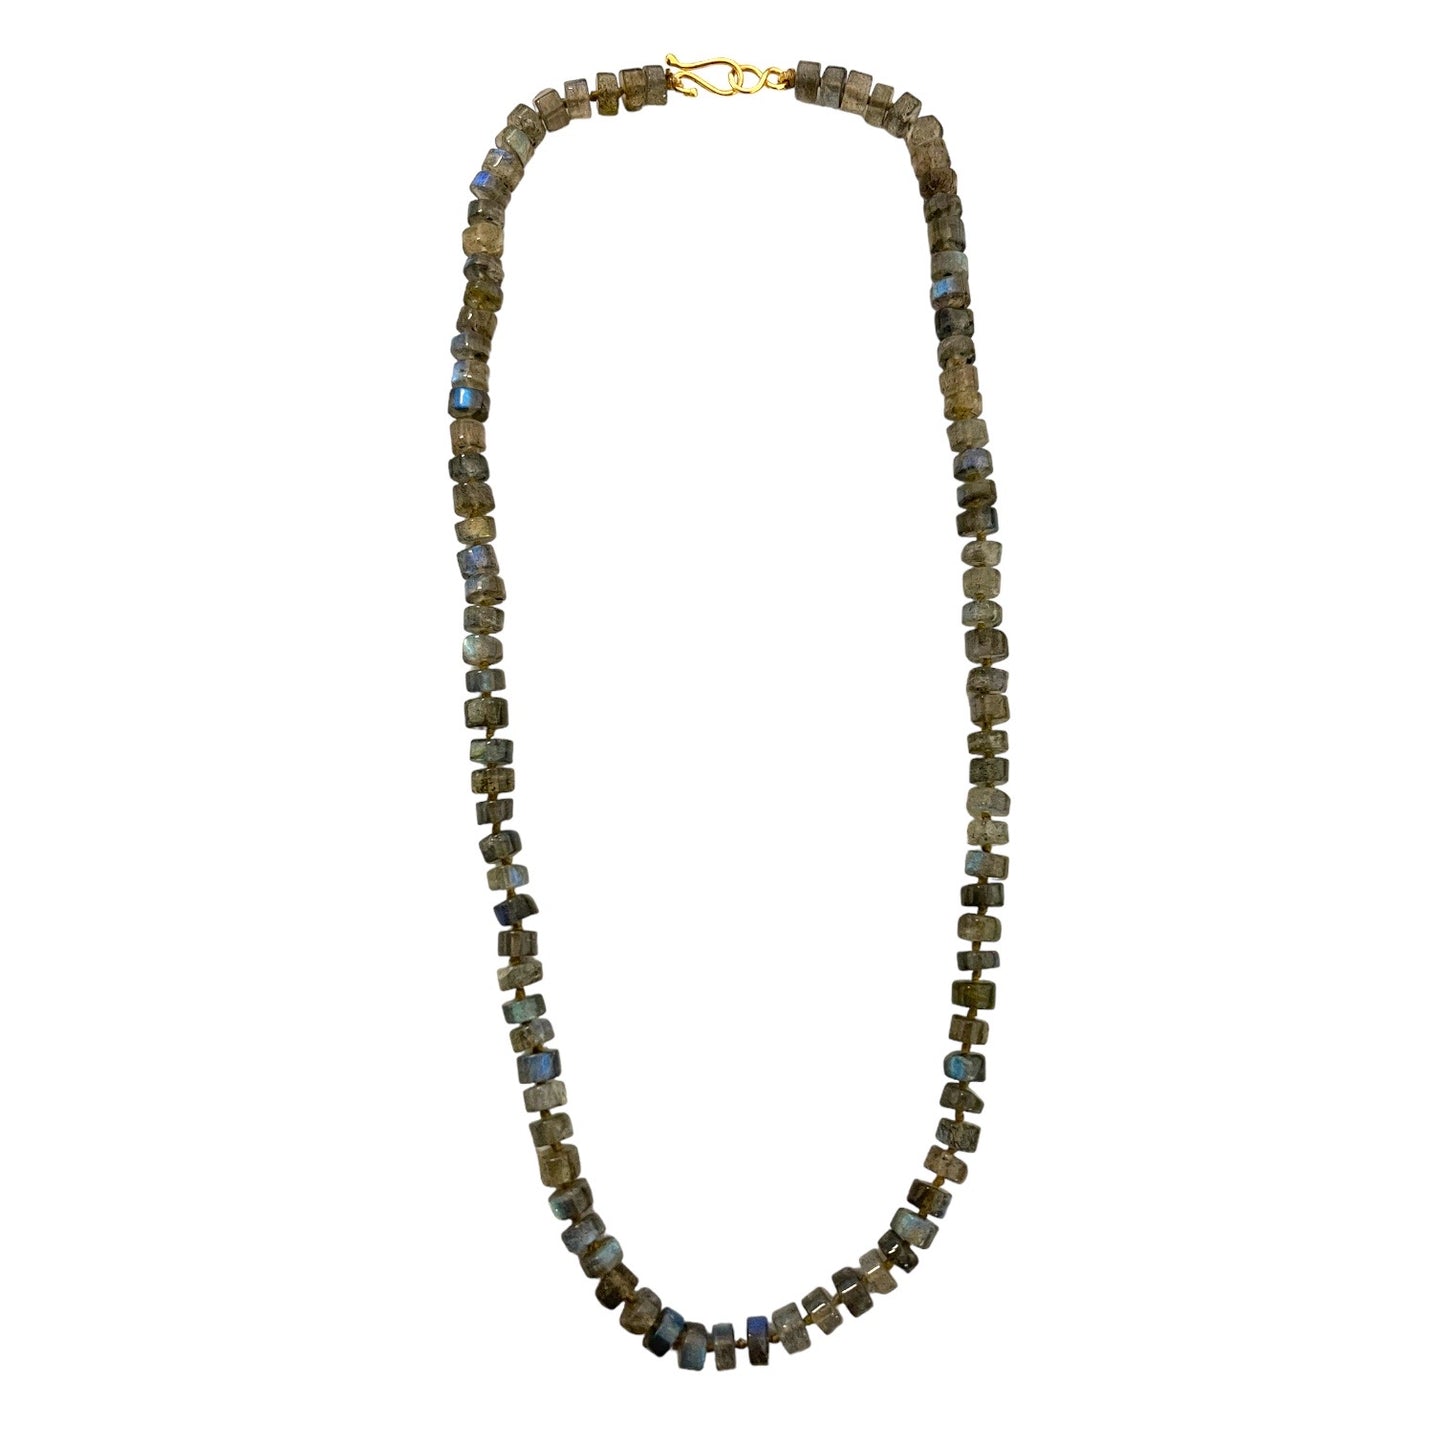 Knotted Labradorite Necklace